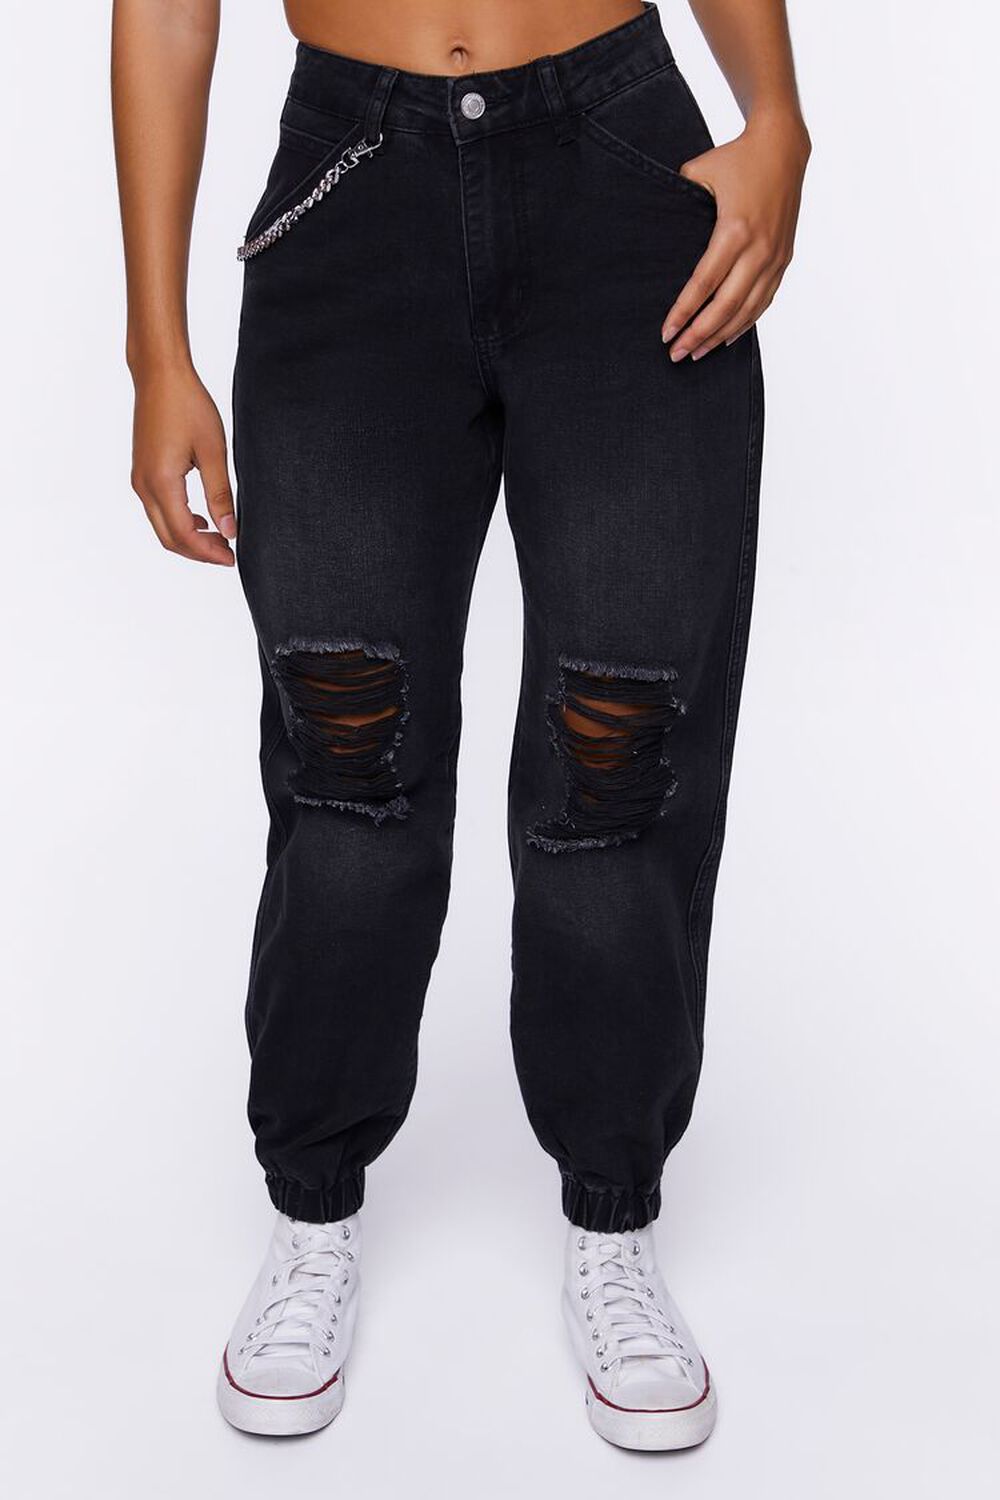 Distressed Denim Wallet Chain Joggers, image 1